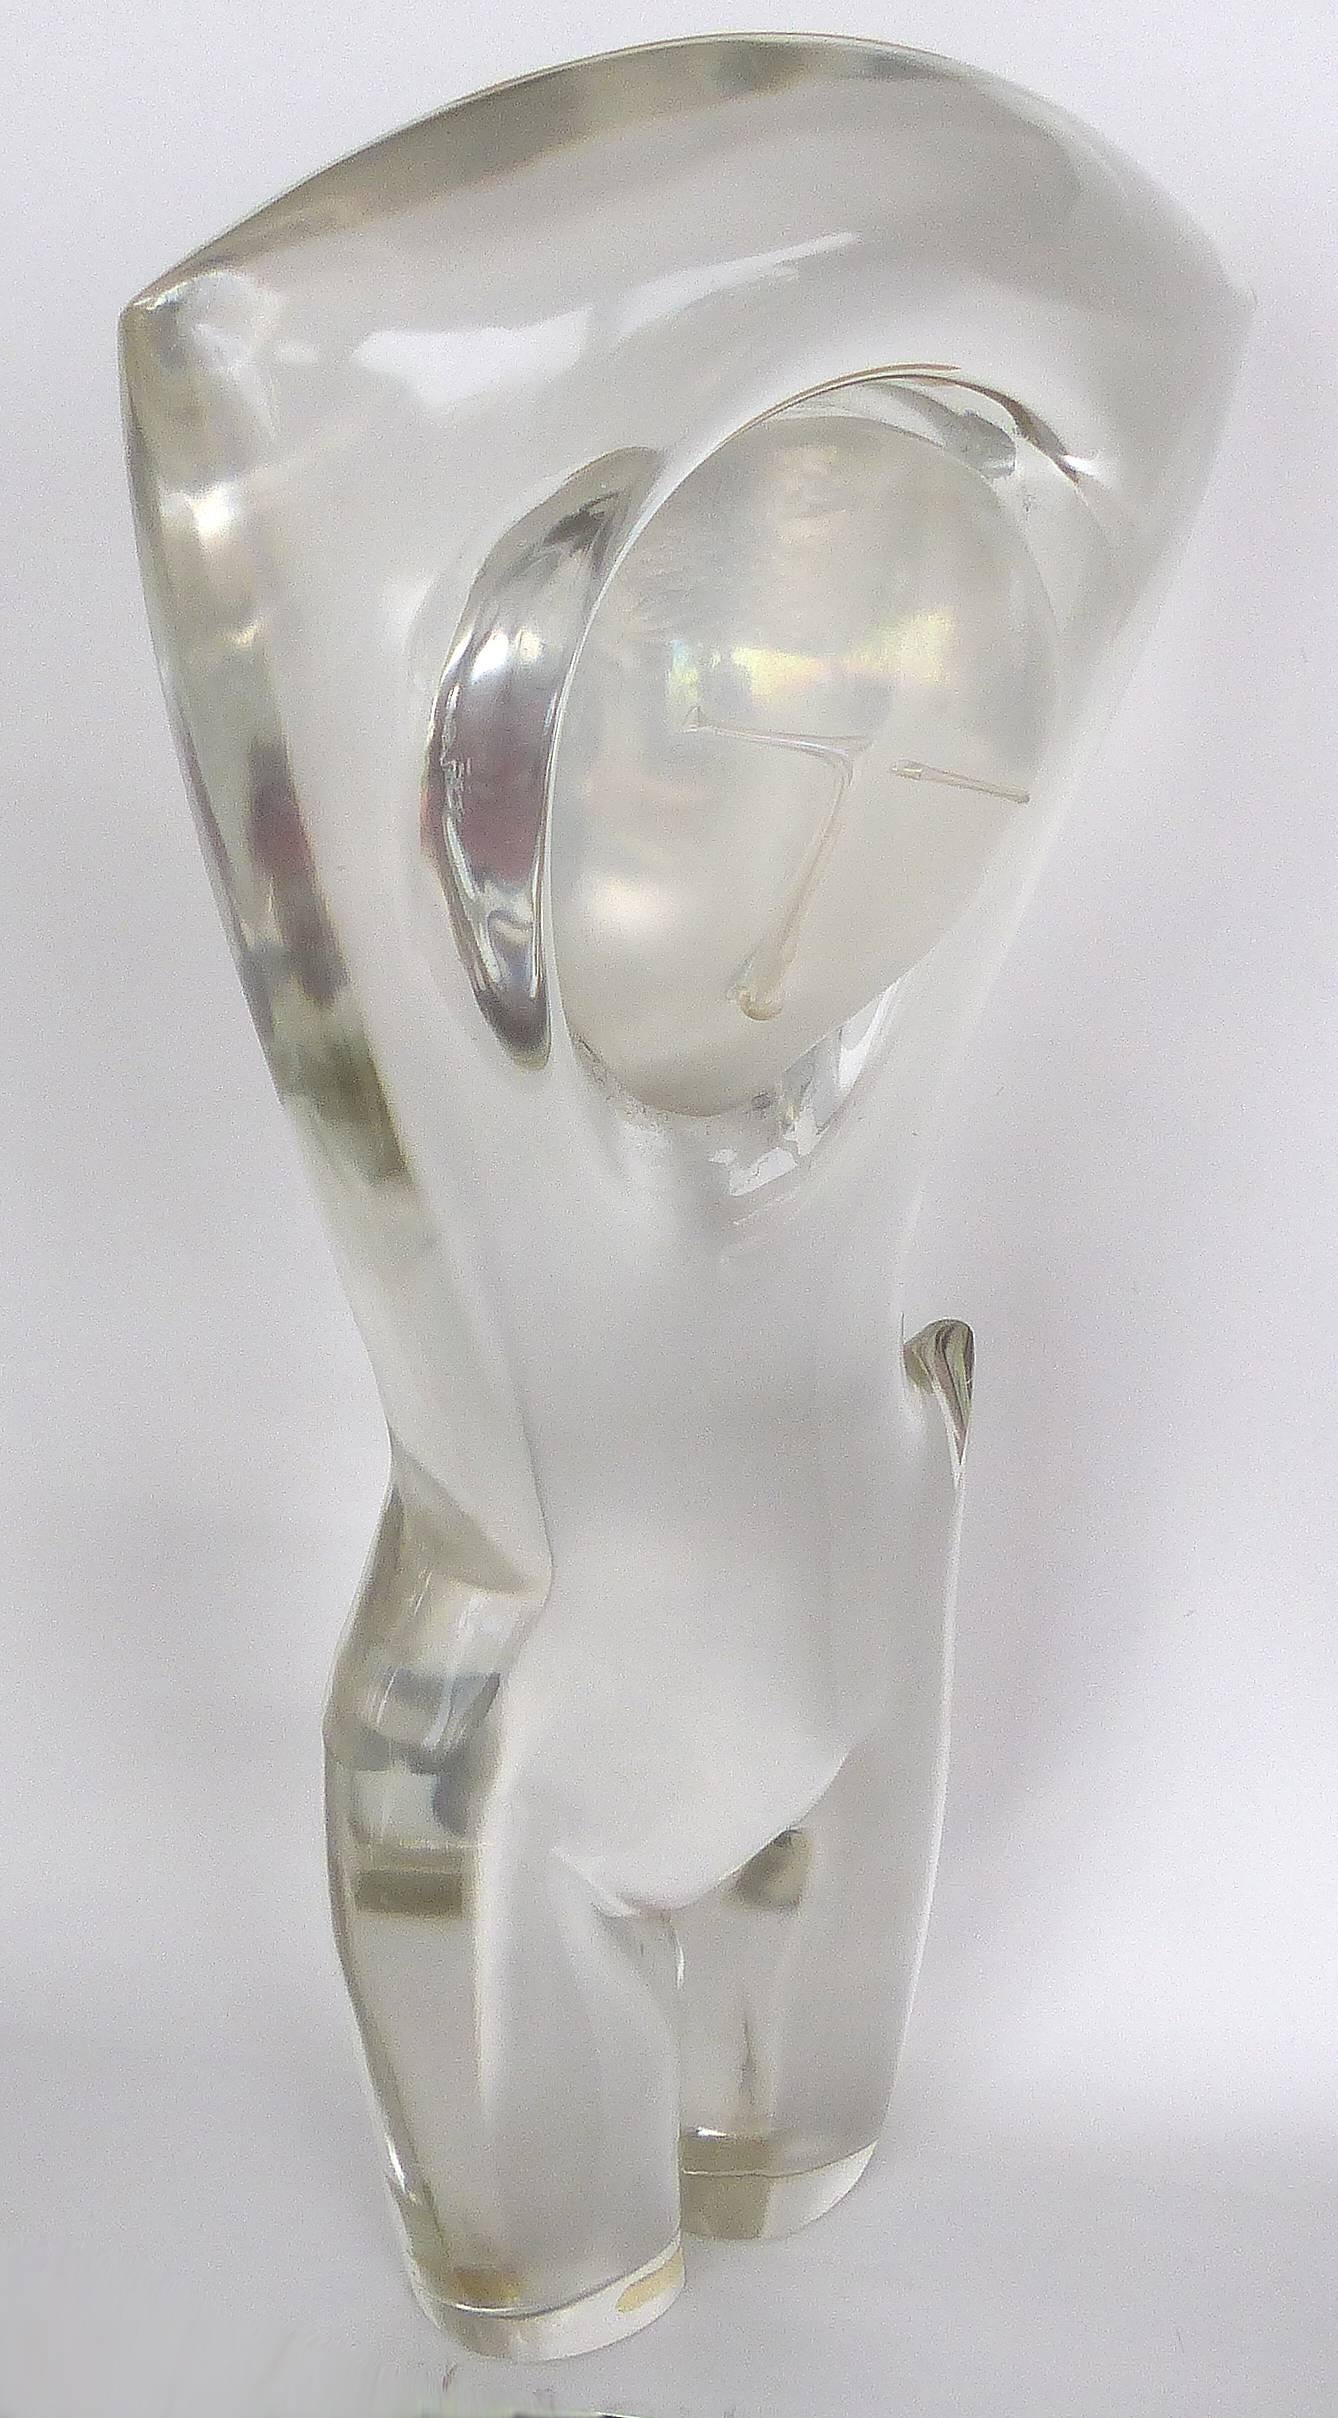 Loredano Rosin Modern Clear Glass Sculpture of a Woman's Nude Torso

Offered for sale is a stylish and quite substantial glass sculpture of a woman's torso by Loredano Rosin . A elegant glass sculpture with modernist lines and minimalism.